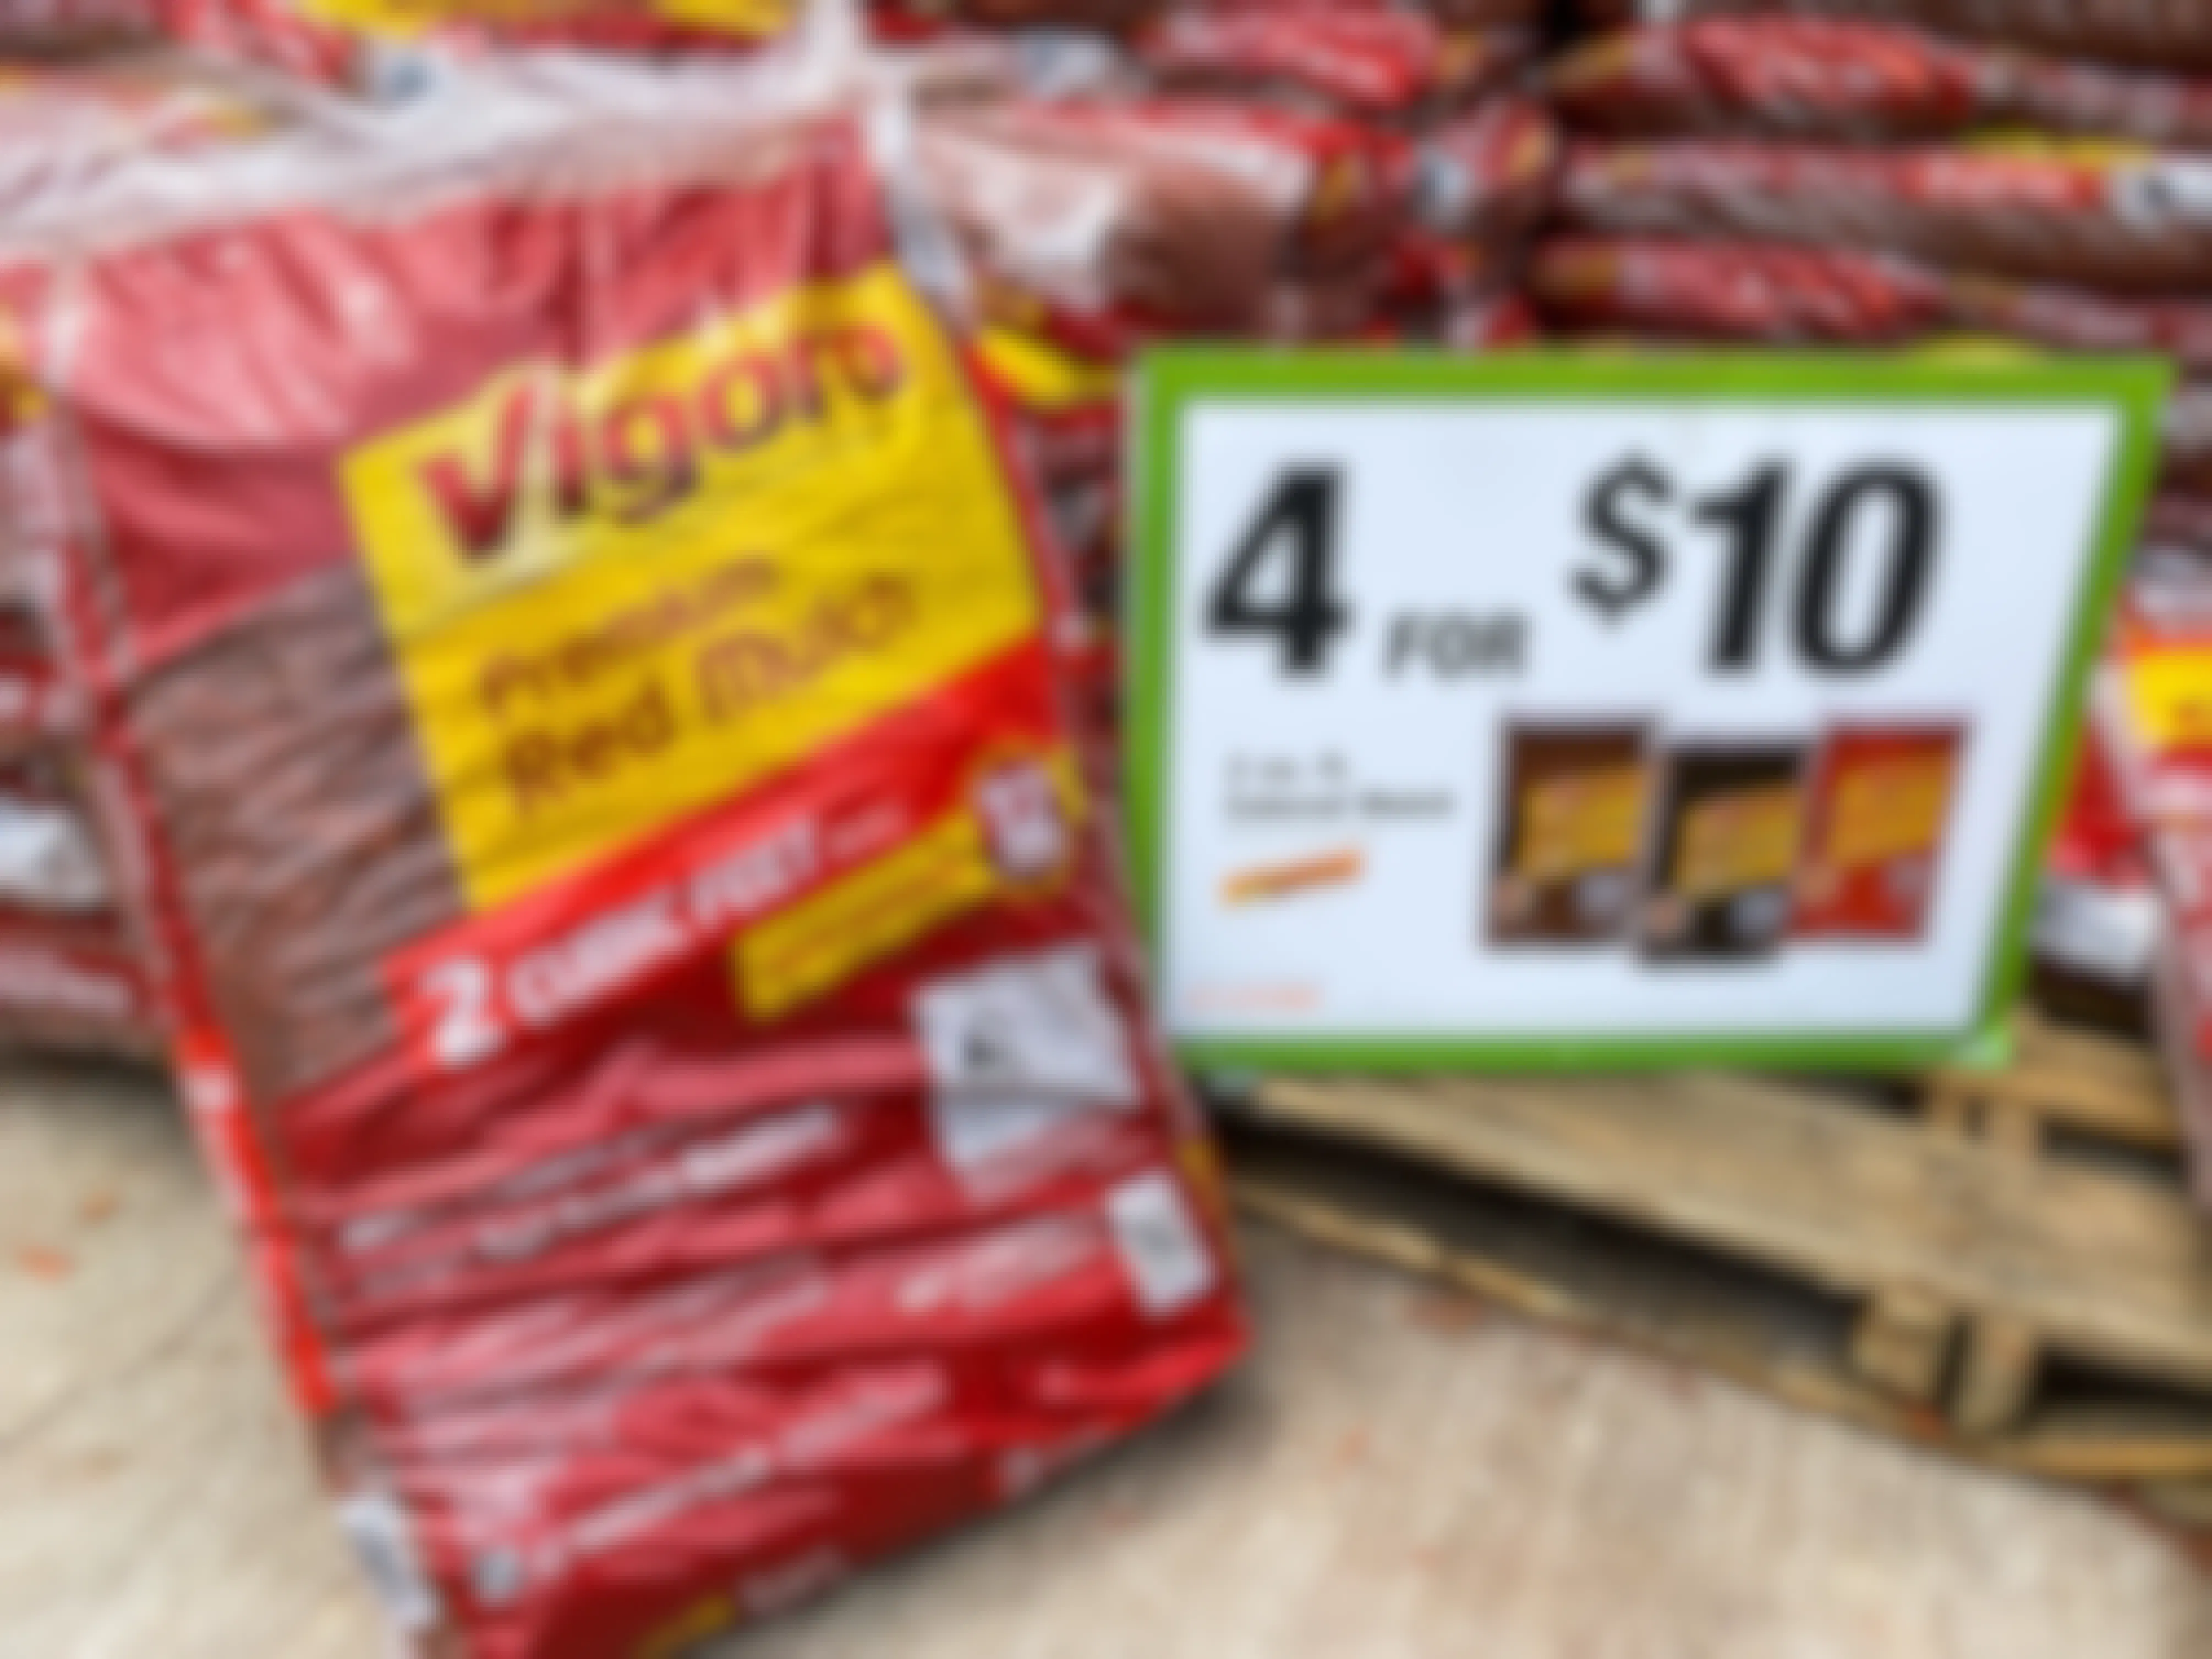  A bag of vigoro red mulch next to a 4 for $10 sign at Home Depot